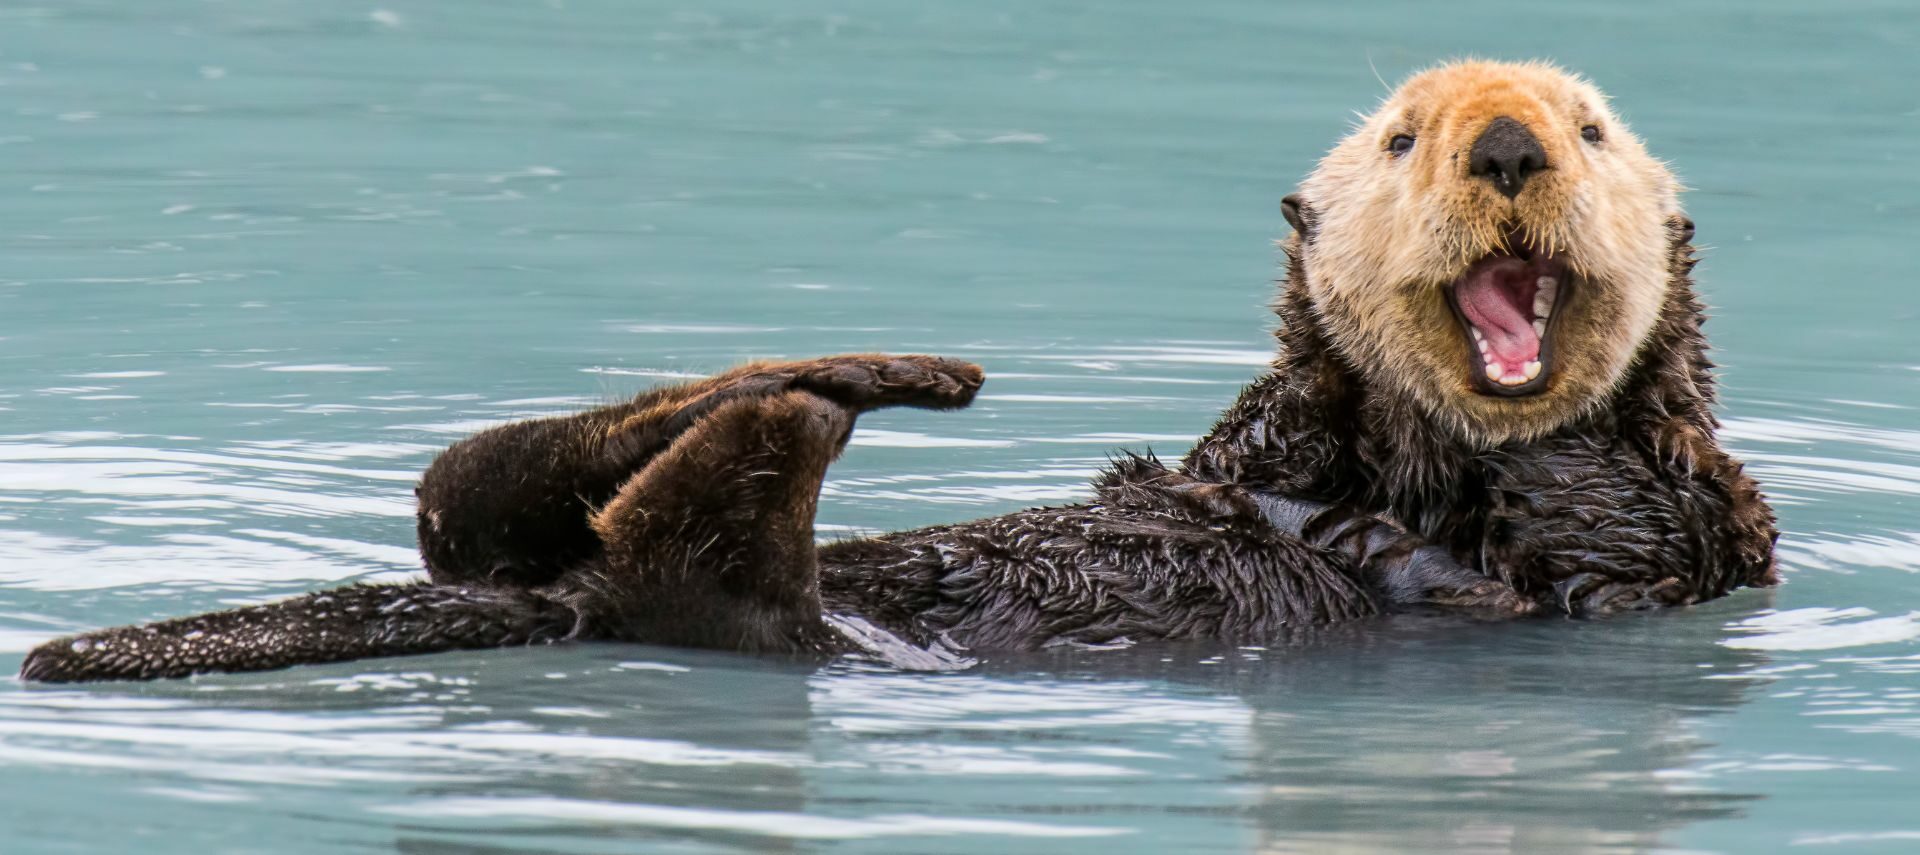 A smiling sea otter on its back in the water